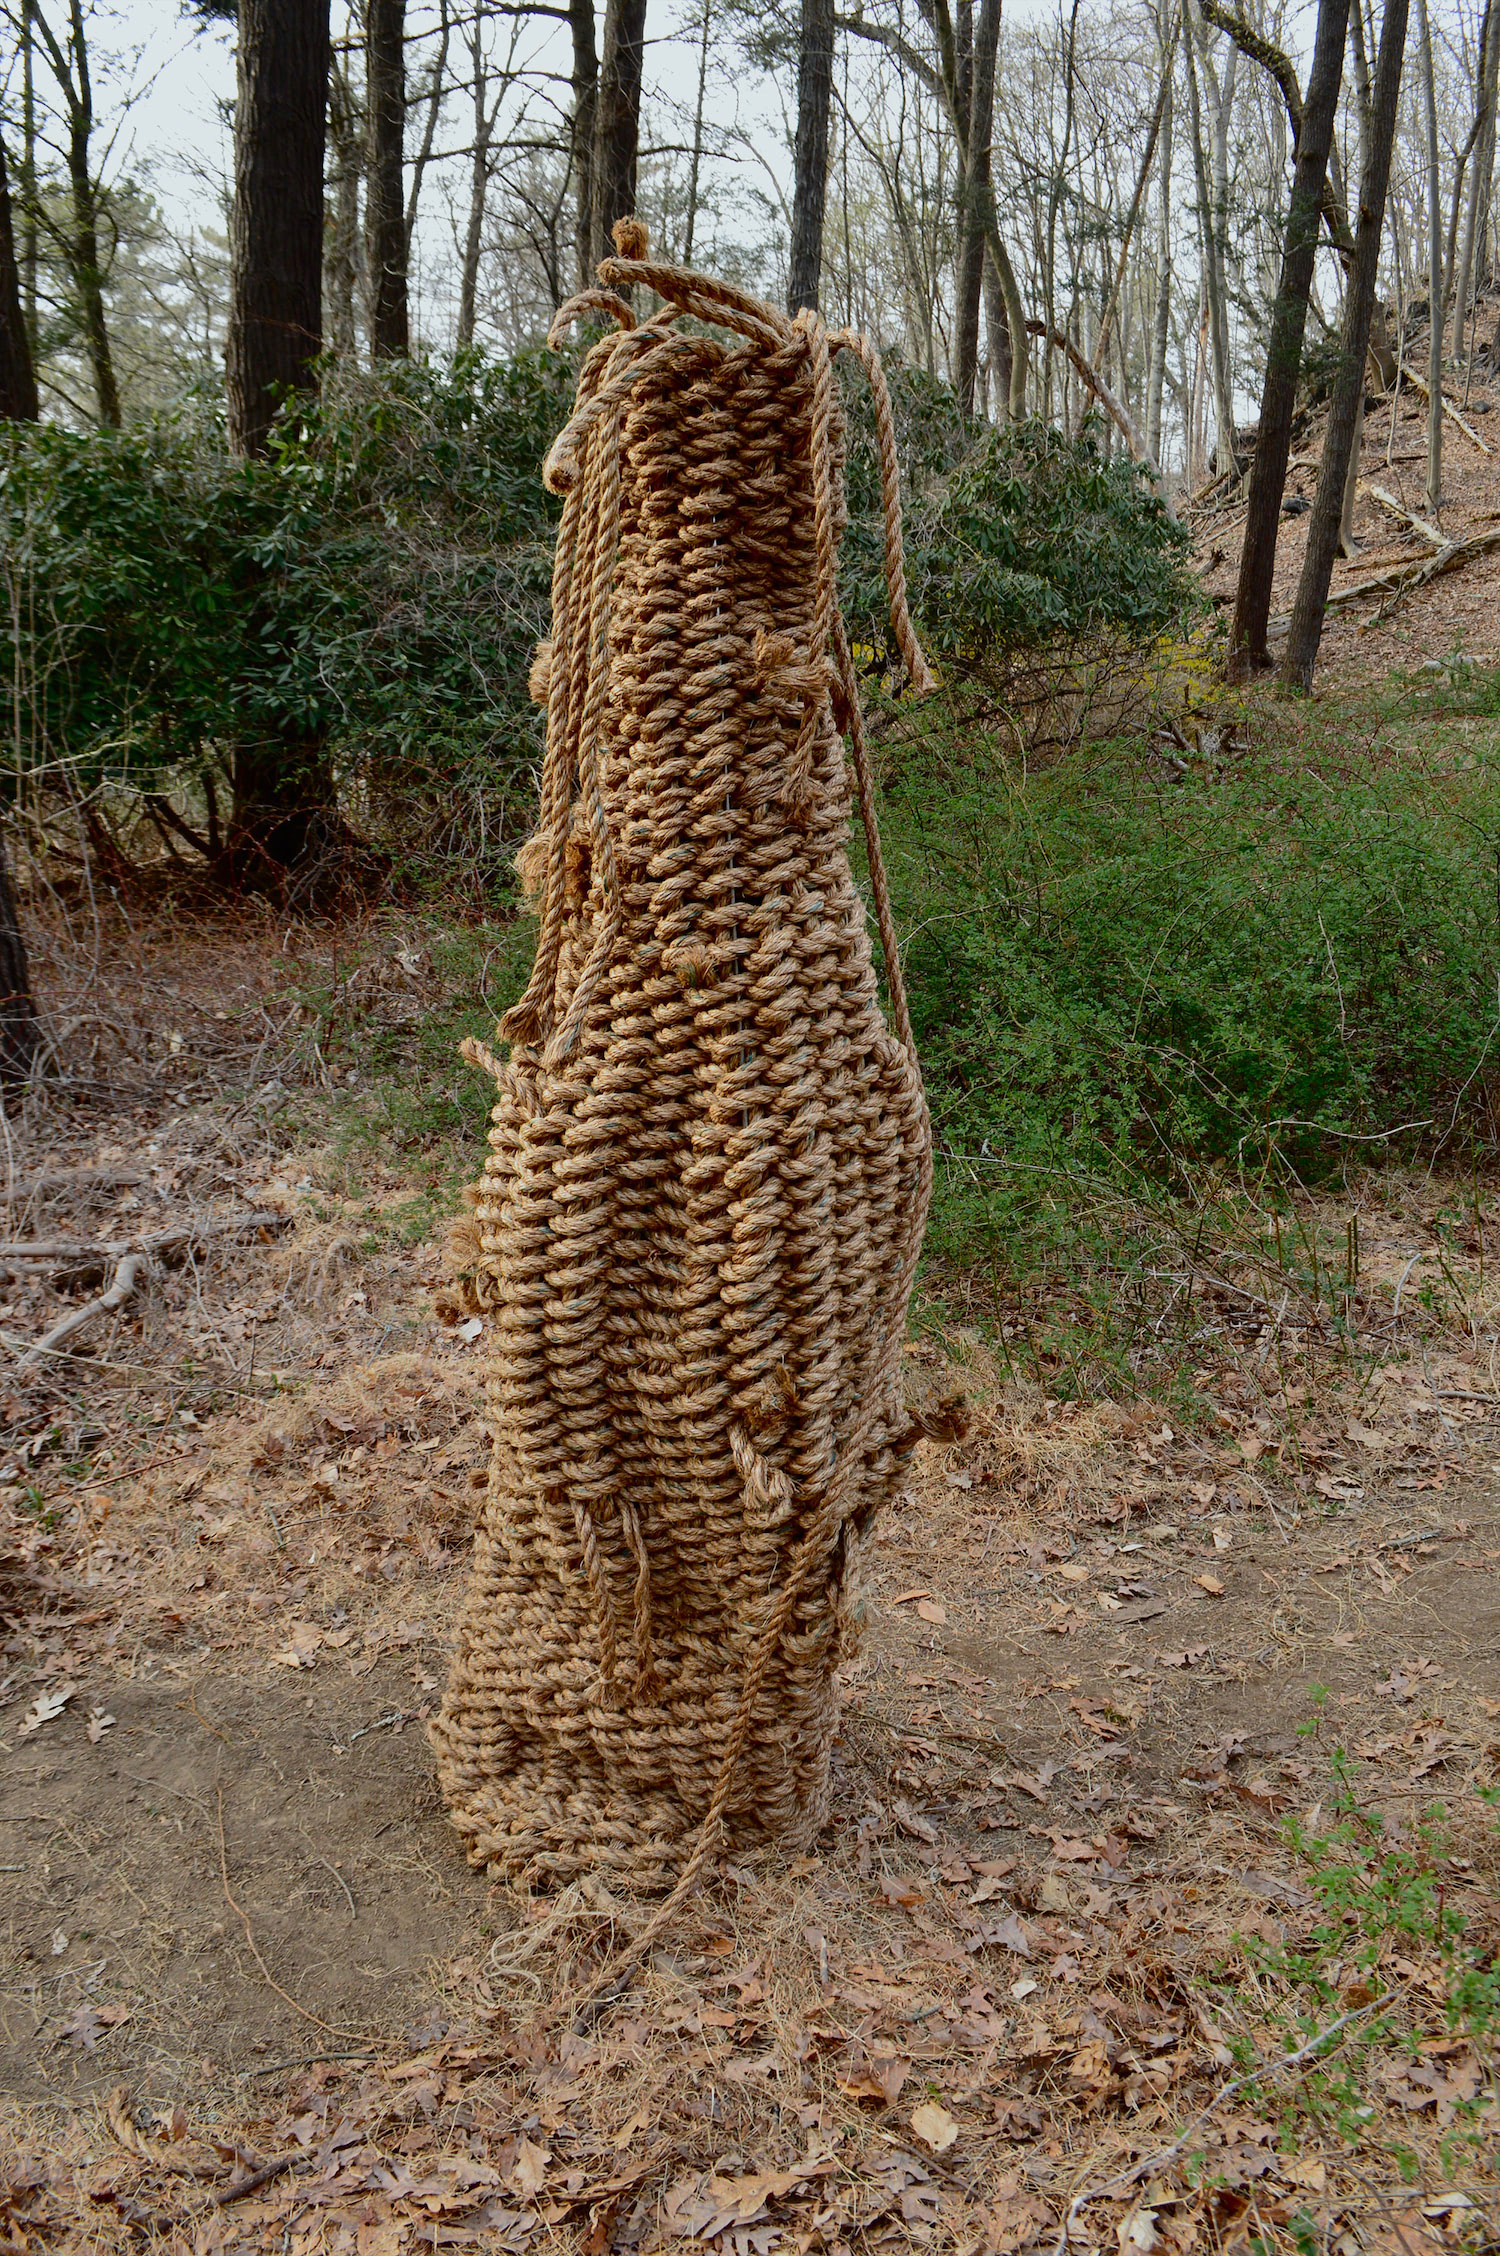 The side of the basket nearest the plaque is photographed. This work can be understood as site construction in the expanded field of sculpture, as part of the basket was woven on-site by participants. The bodily nature of the form mimics a limbed figure with a protruding stomach.